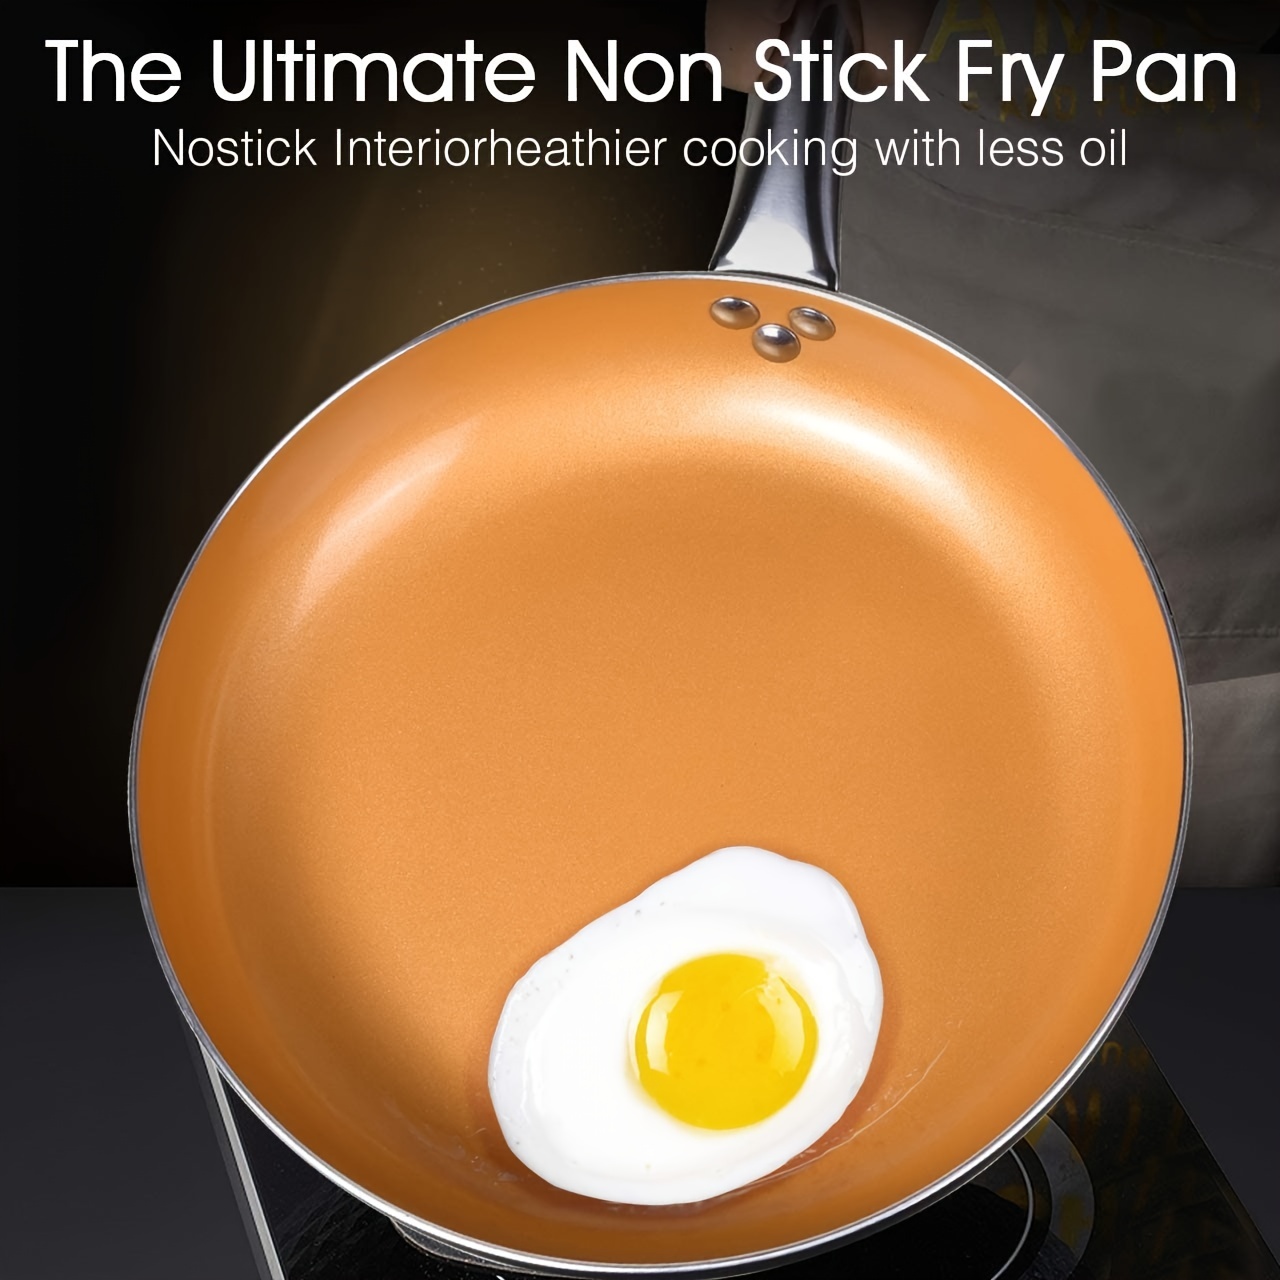 Try Me 8-inch Nonstick Fry Pan In 5-Ply Stainless Steel » NUCU